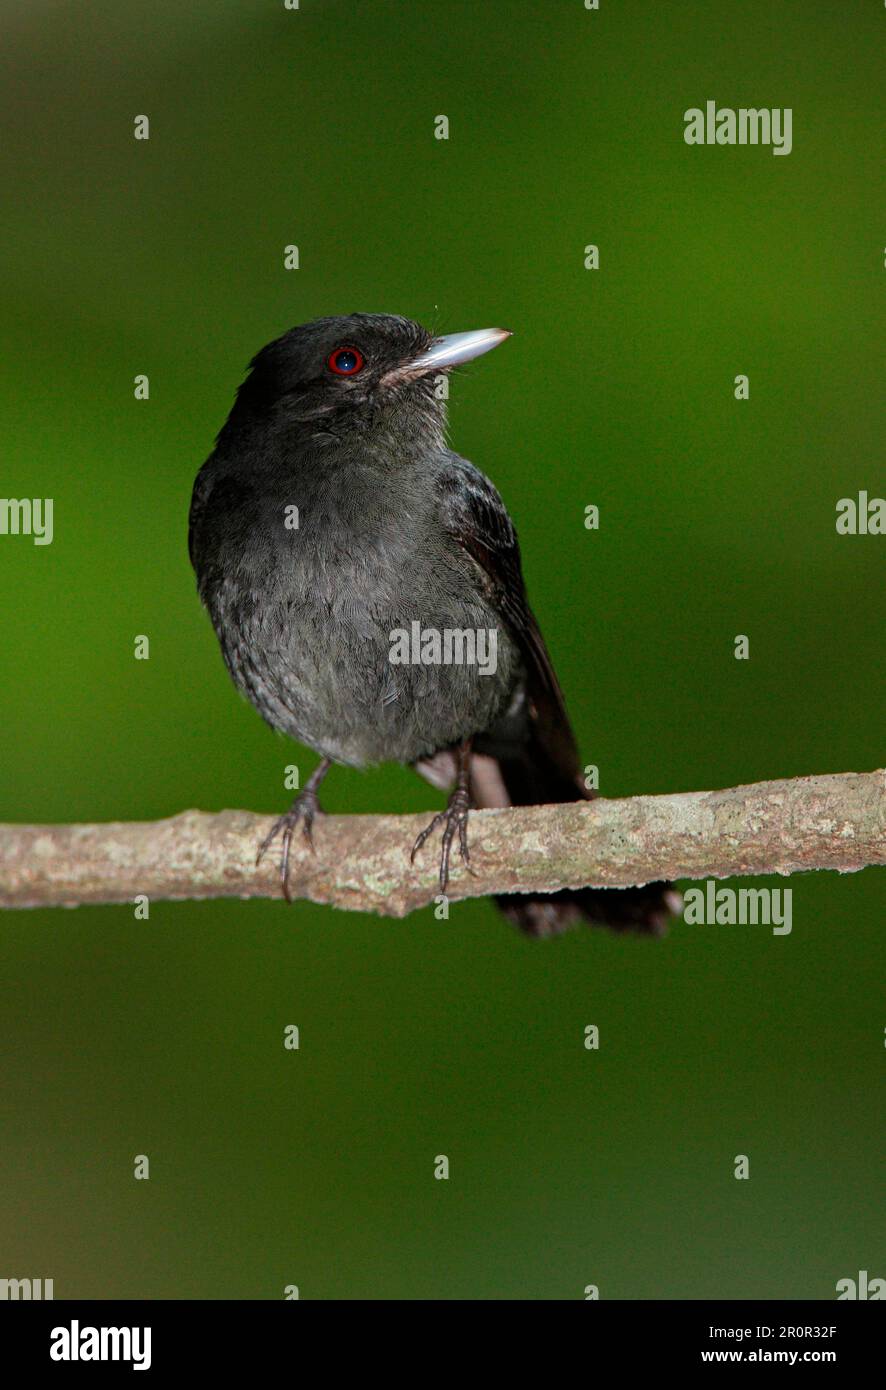 Andean tyrant (Knipolegus signatus), adult male, sitting on a branch, Jujuy, Argentina Stock Photo